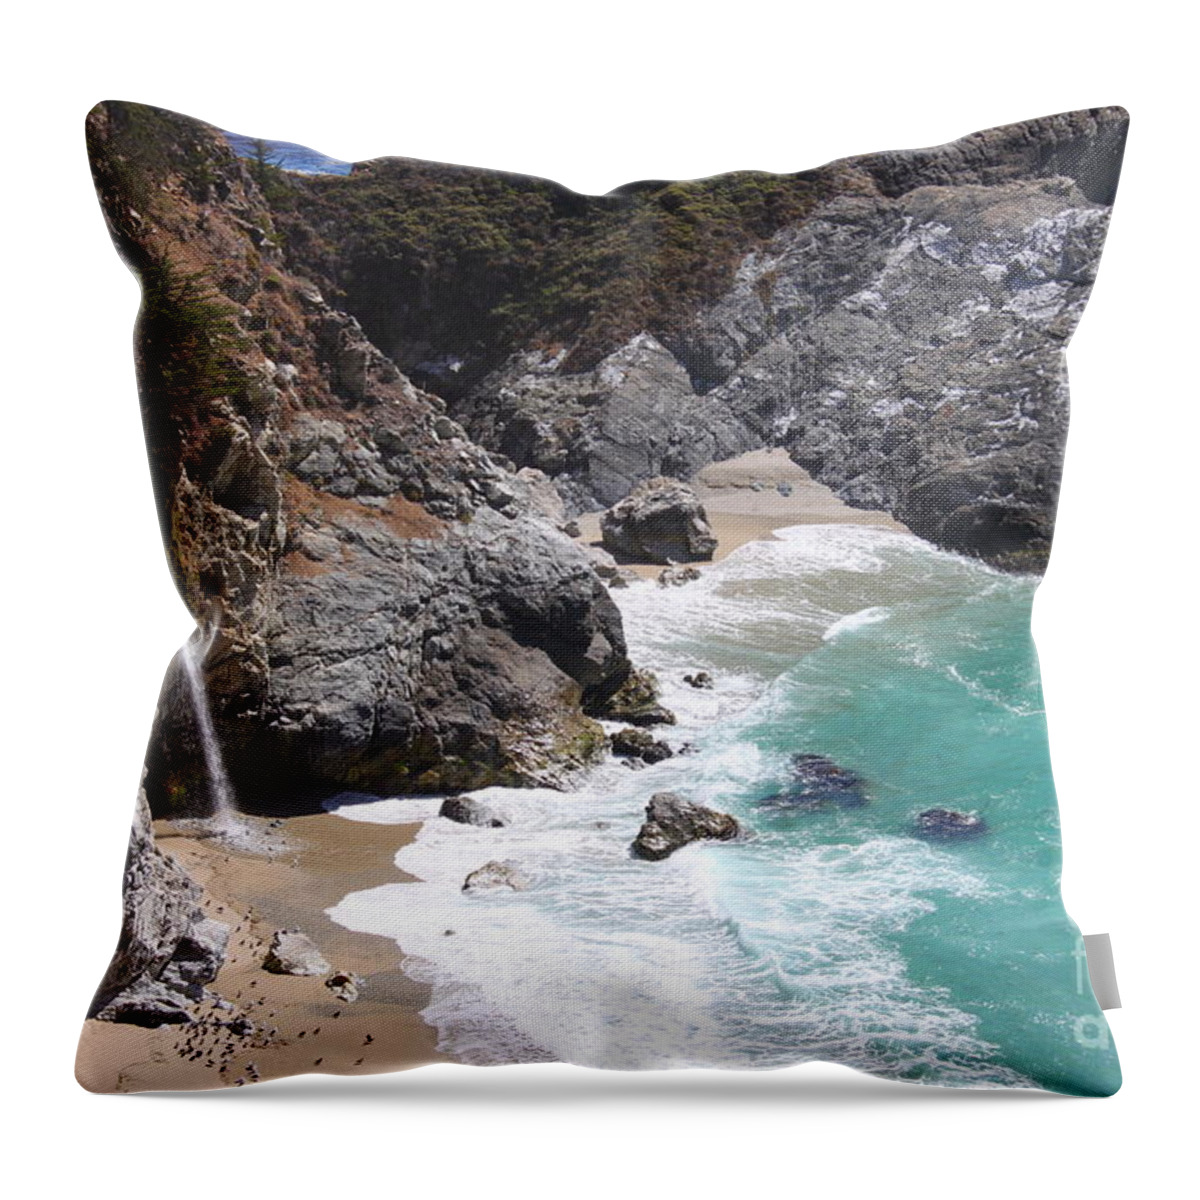 Mcway Falls Throw Pillow featuring the photograph Mcway Falls #1 by Bev Conover